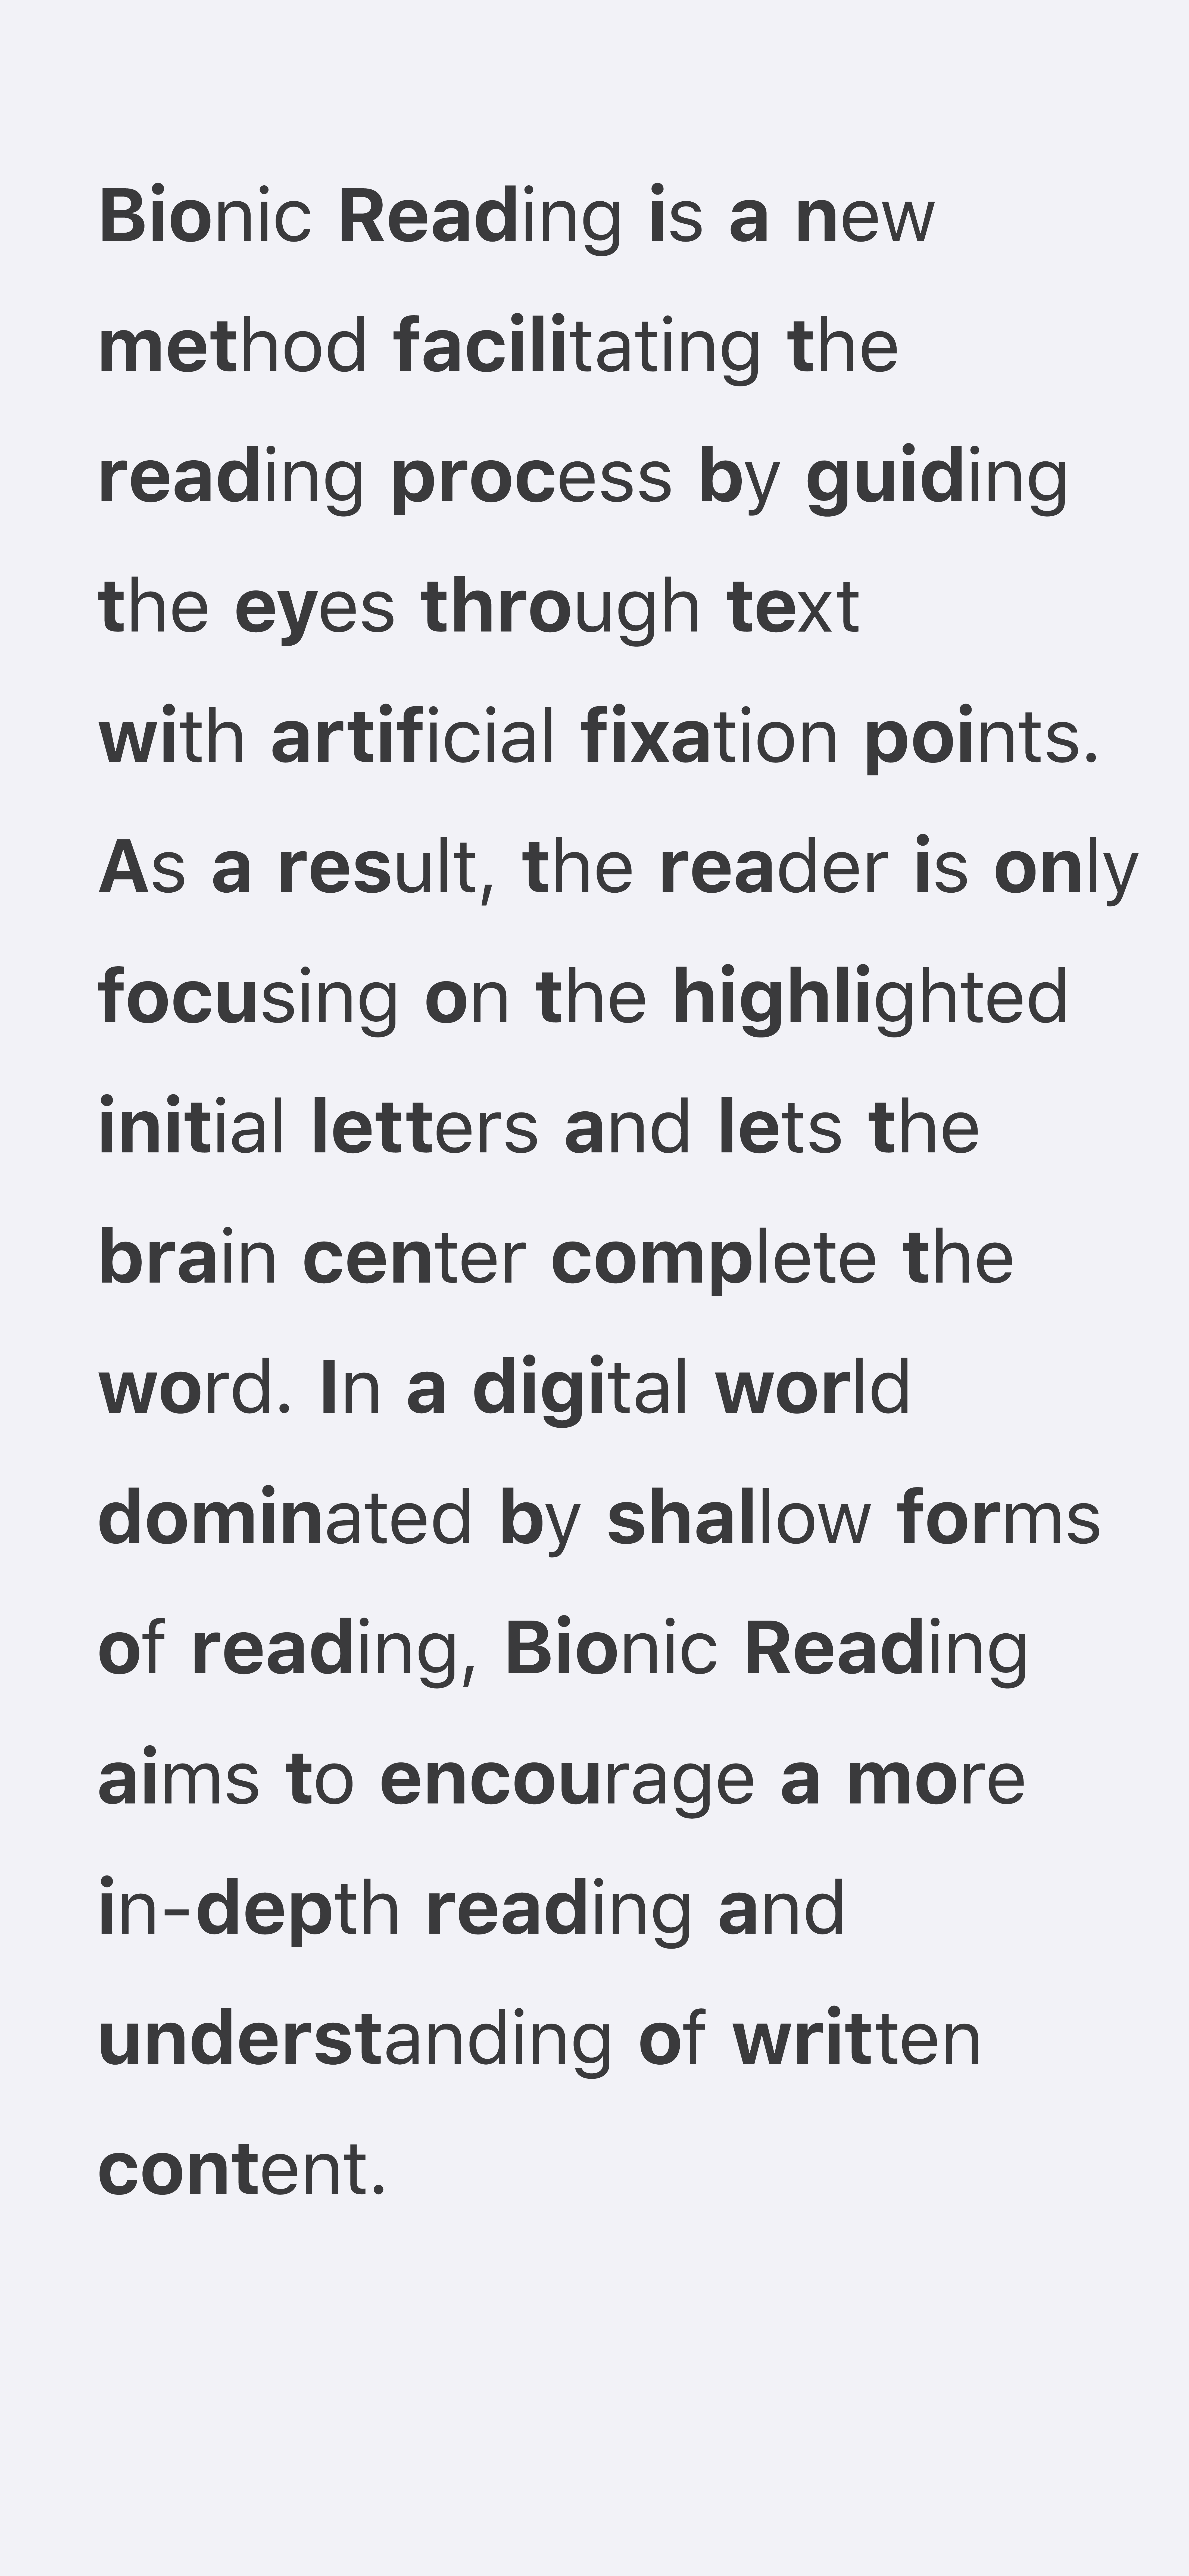 Image with text highlighted with Bionic Reading